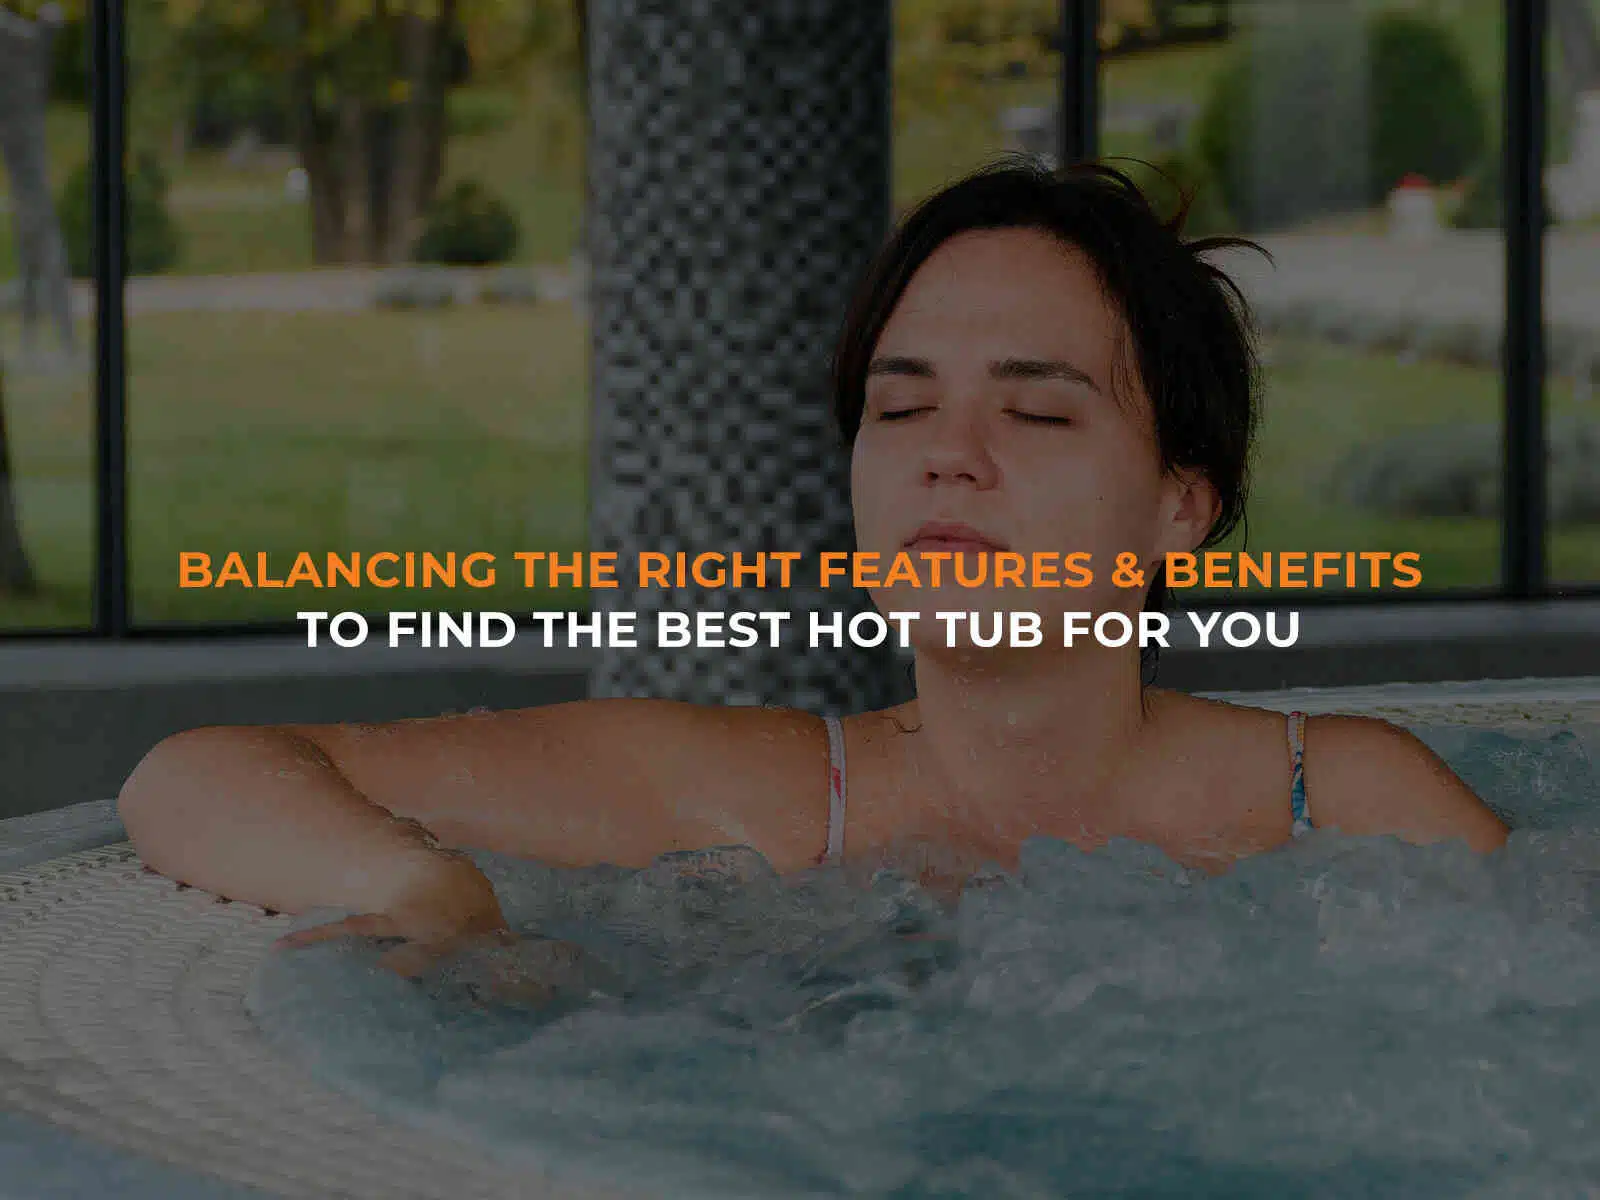 Balancing The Right Features & Benefits To Find The Best Hot Tub For You